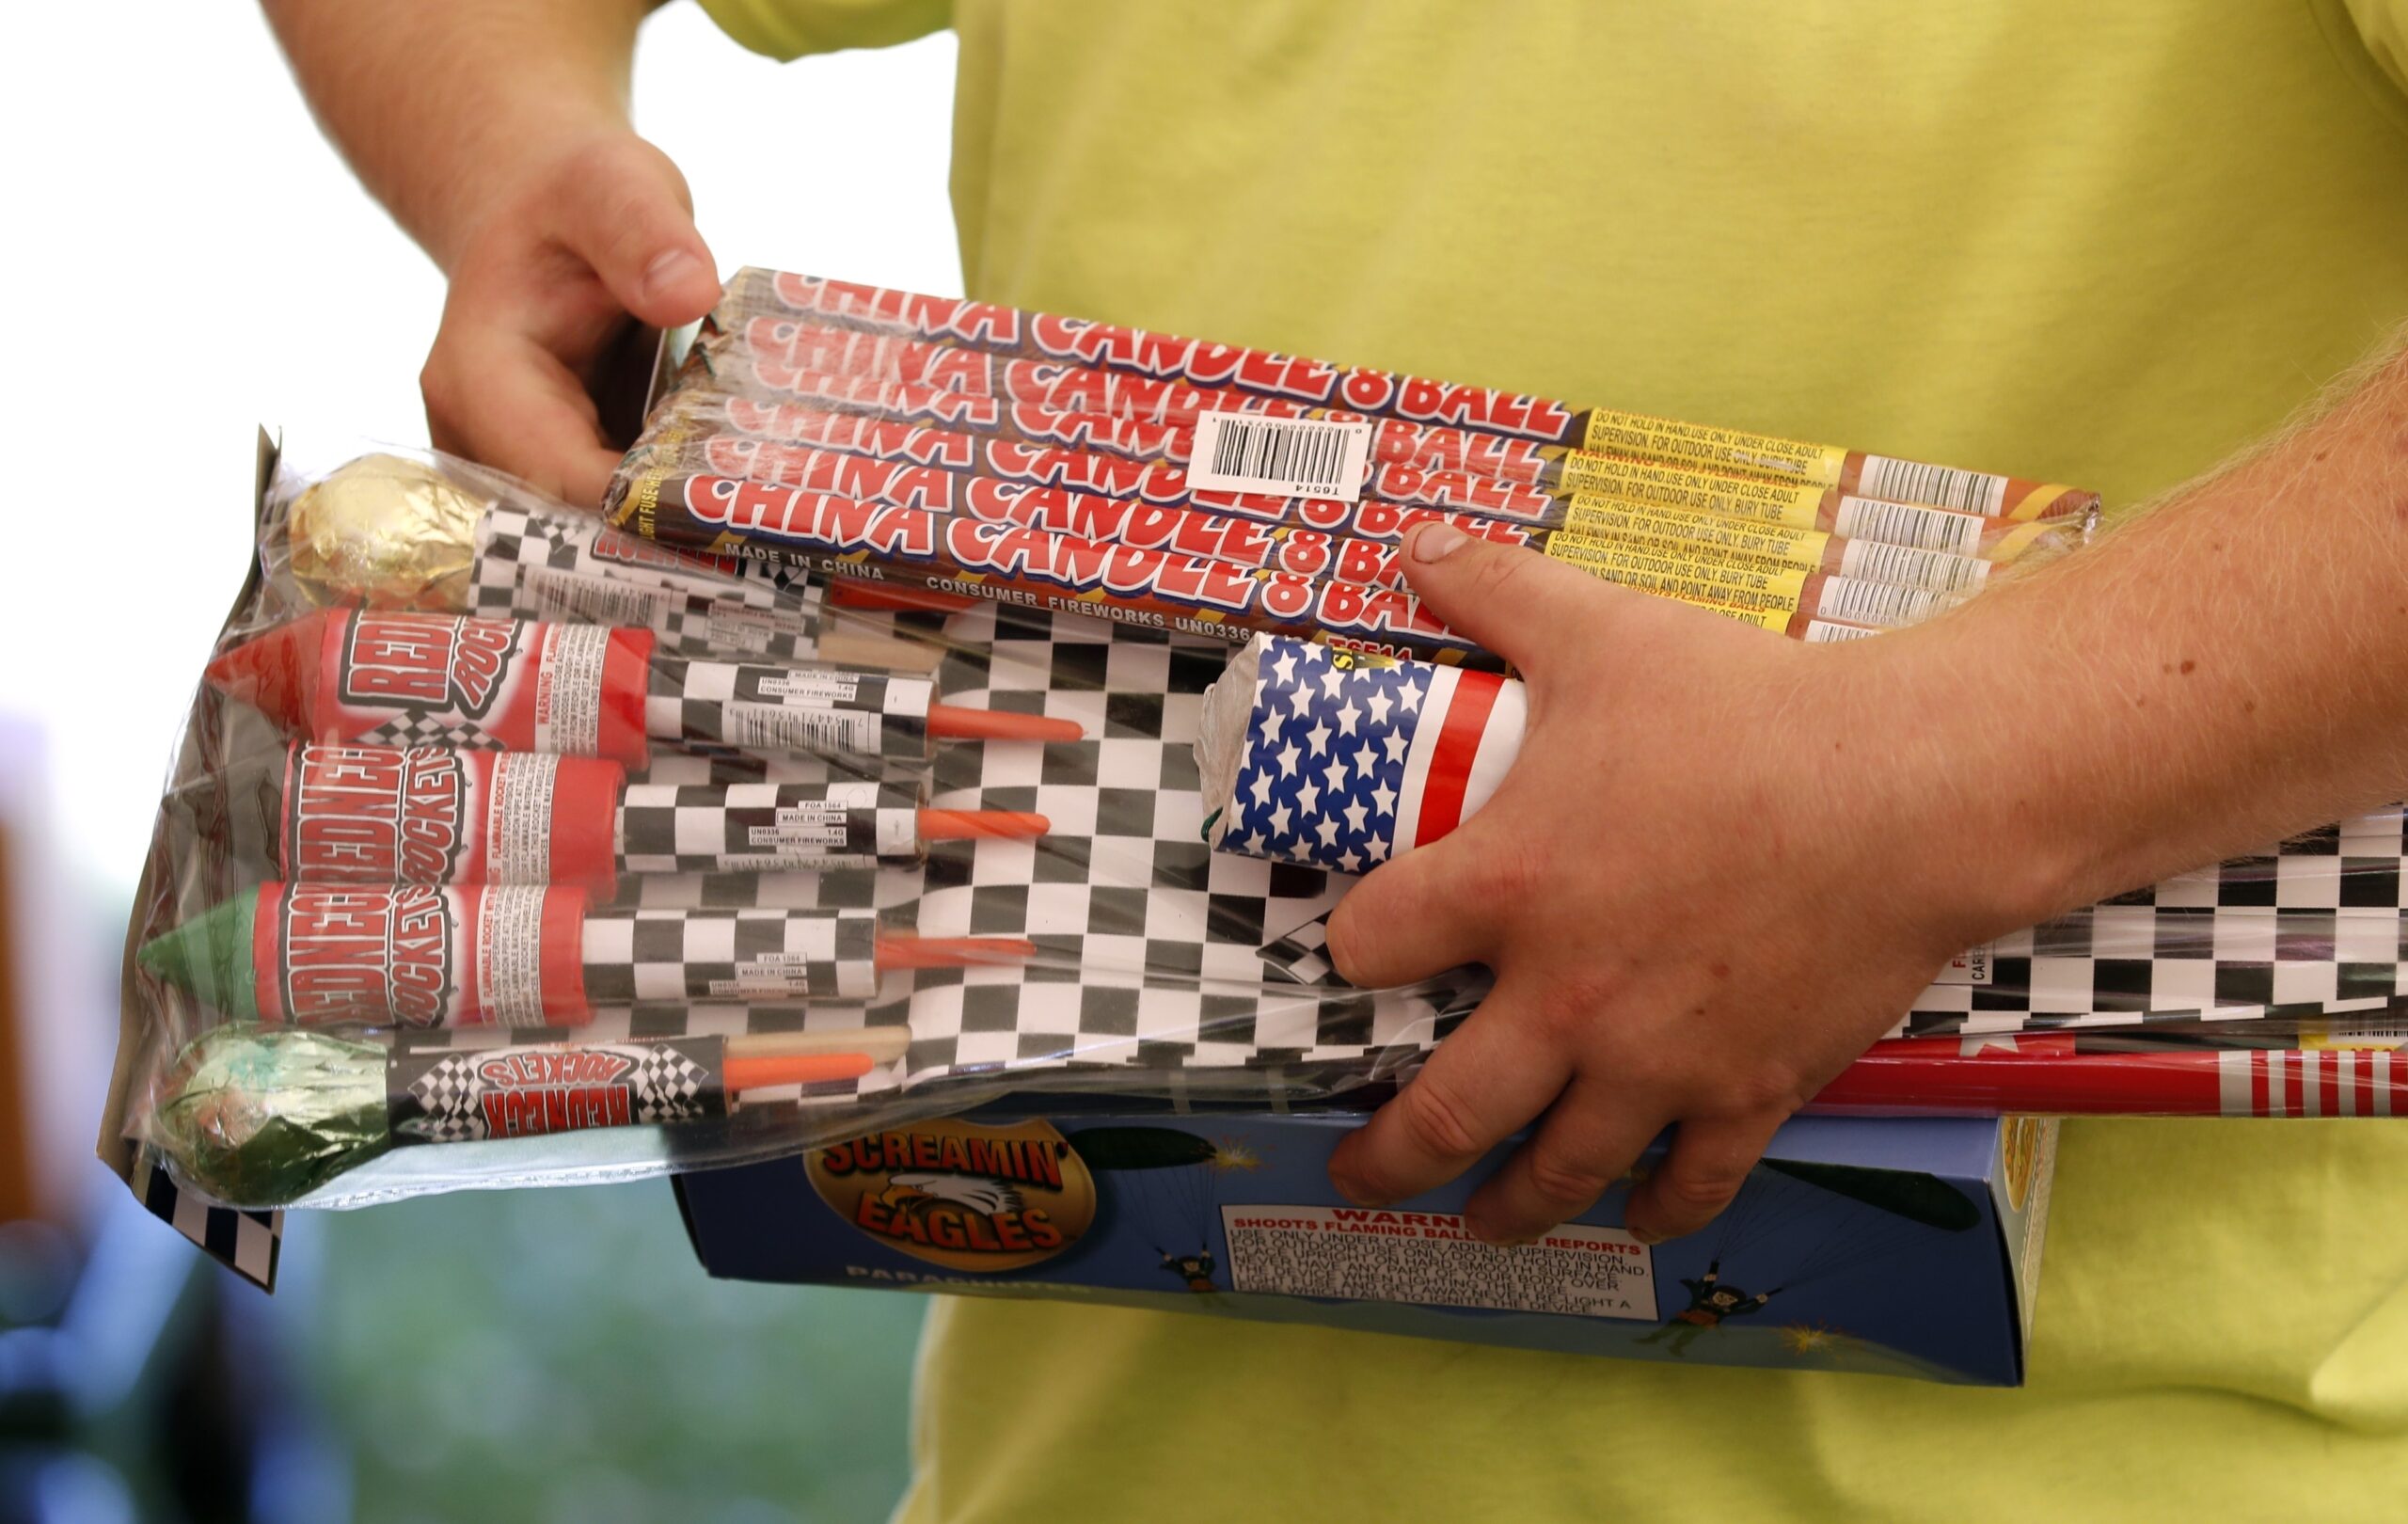 Julian Gibson, of Dallas Center, Iowa, holds packages of fireworks